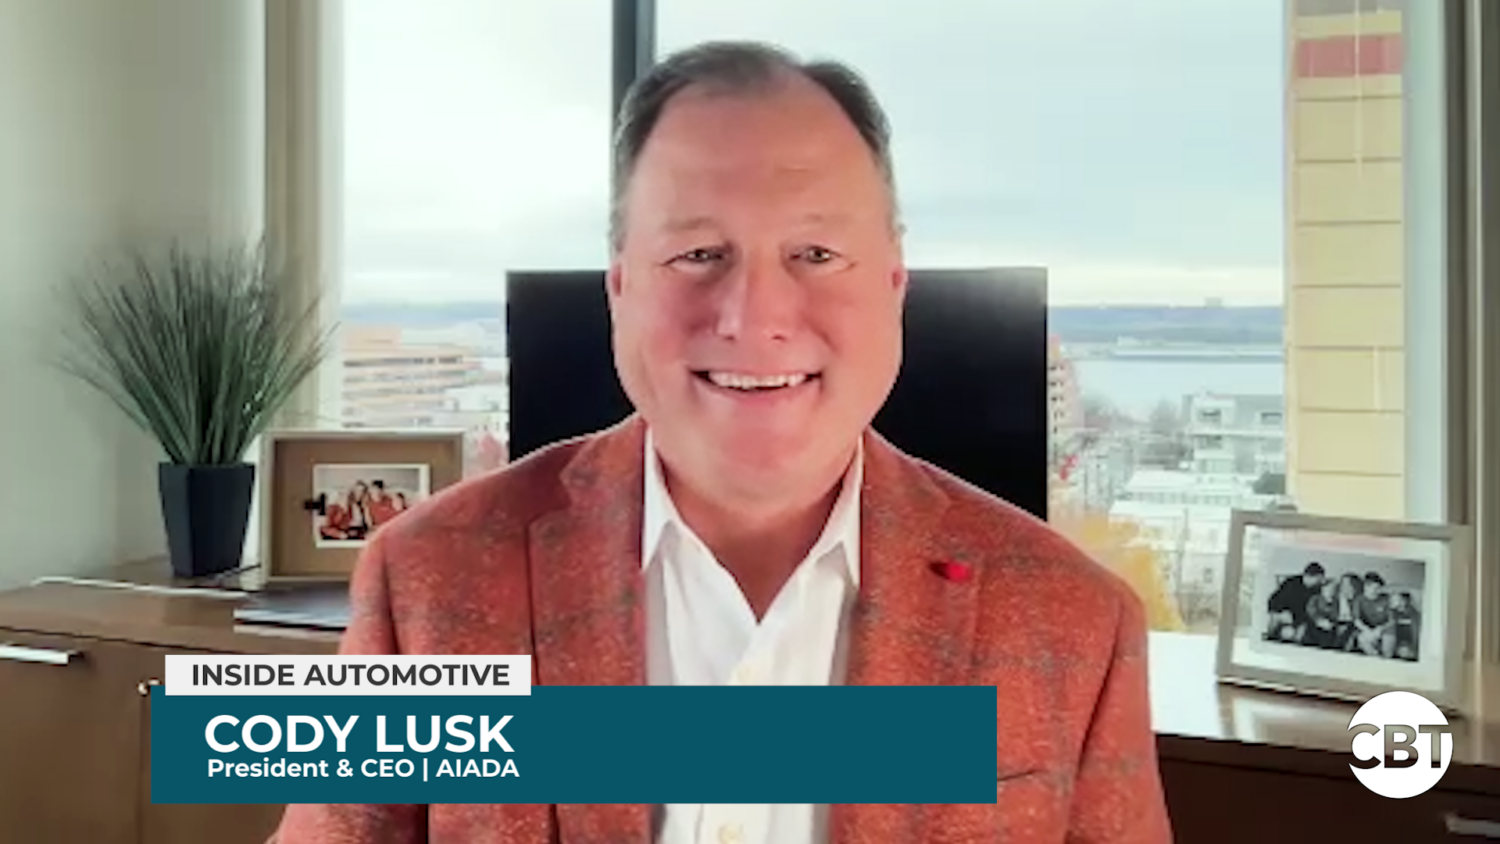 The EV mandate, among other challenges, caught Lusk's attention as a significant initiative that substantially impacted the industry.